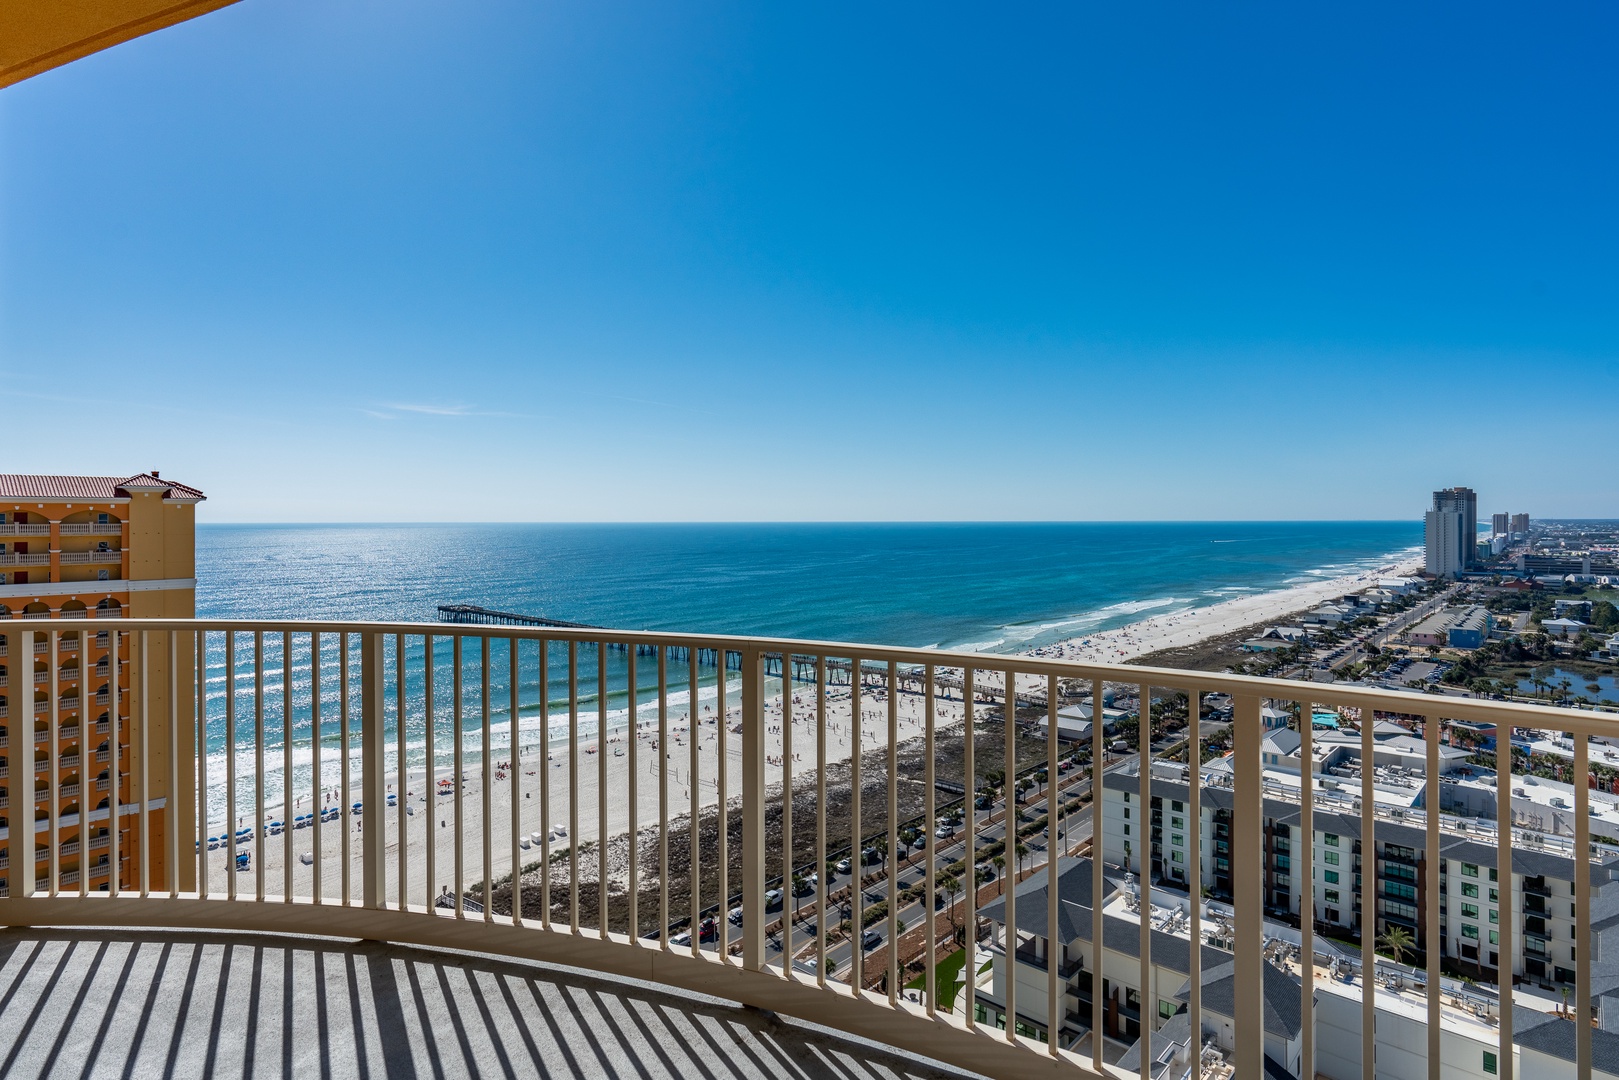 Stunning ocean views from your own personal balcony